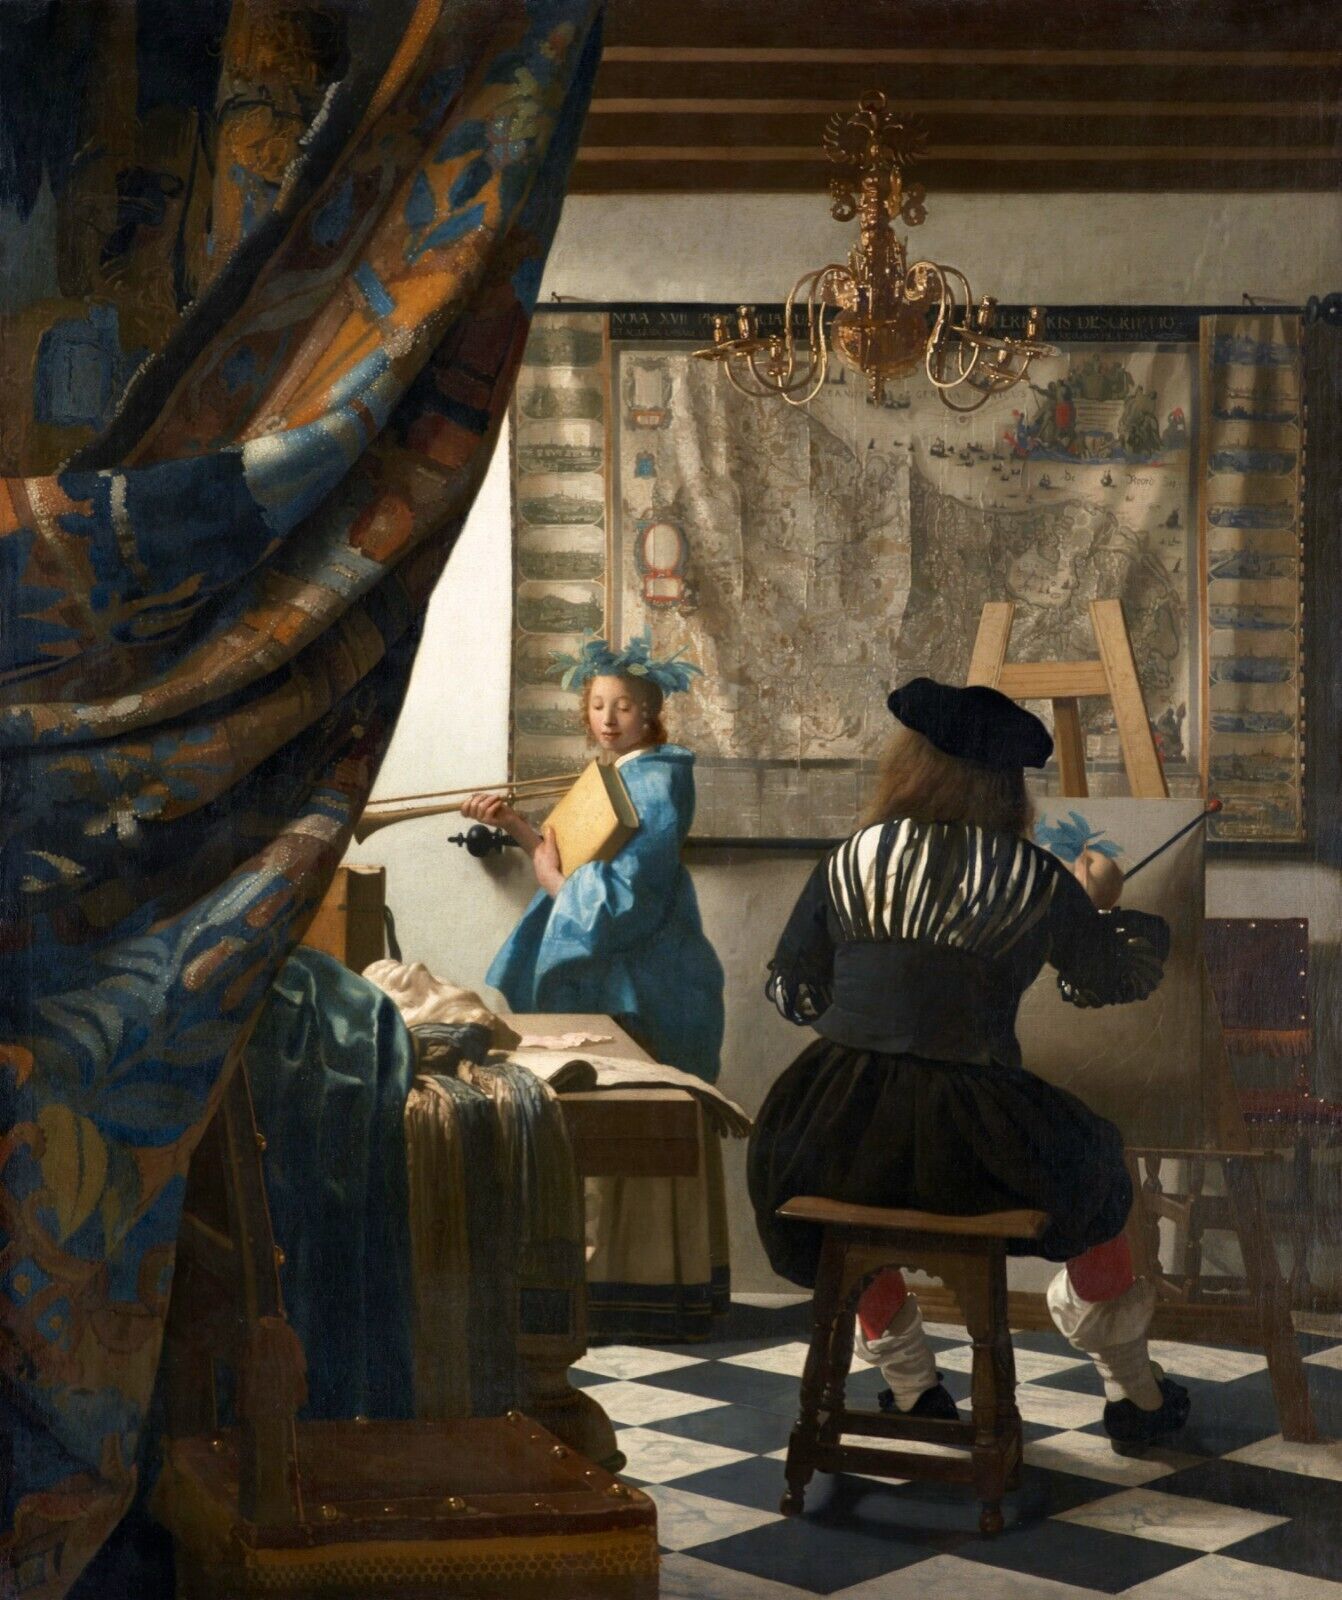 Primary image for 12515.Room Wall Poster.Interior art design.Vermeer painting.The Art of Paintings